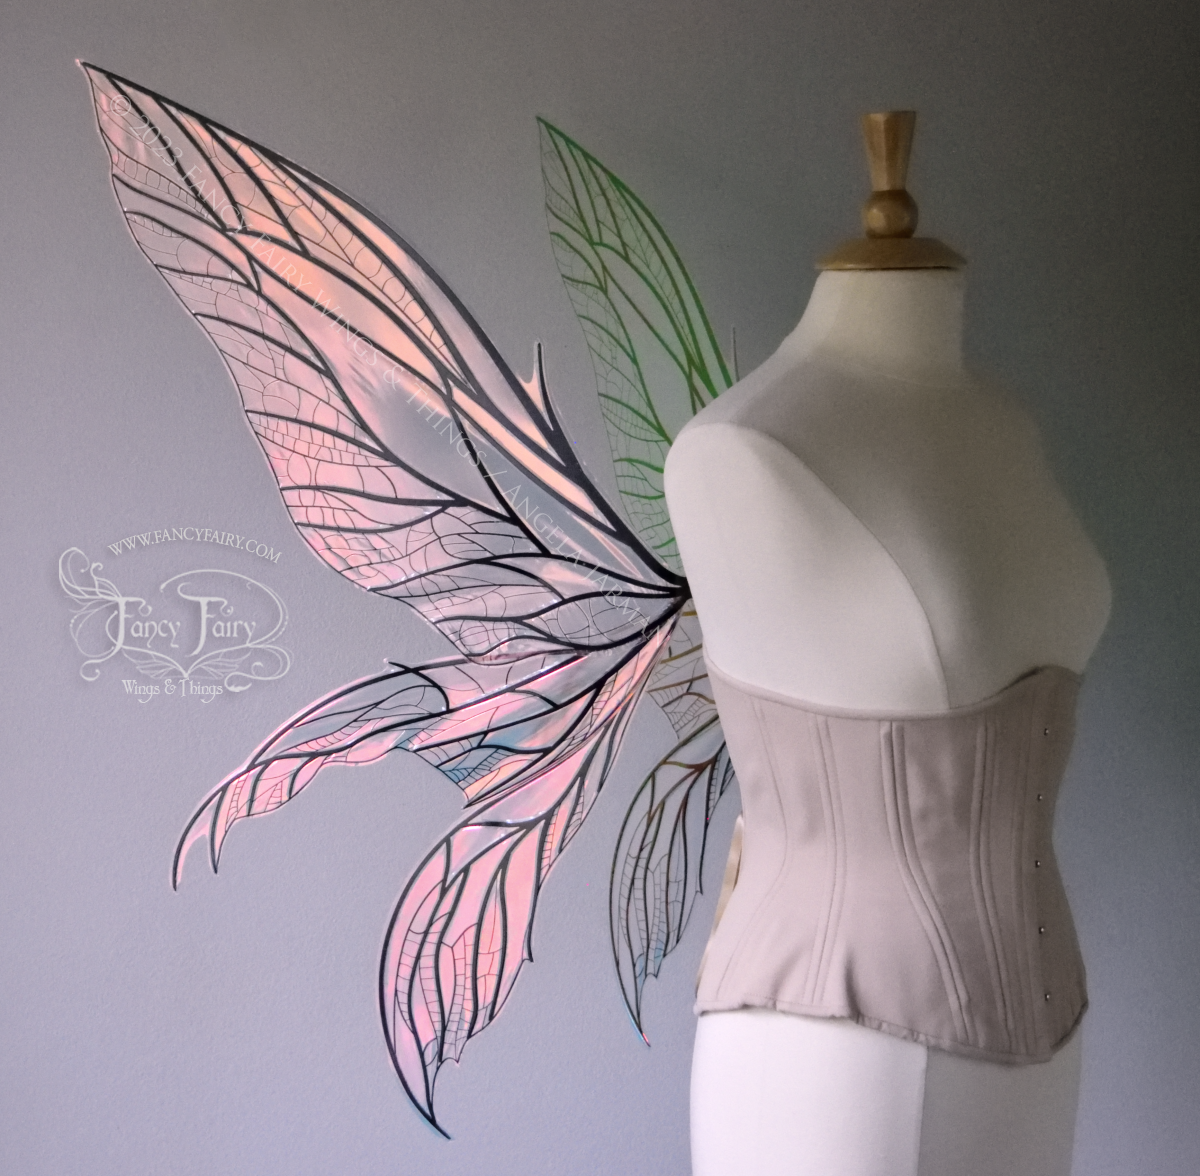 Fayette Convertible Iridescent "Pix" Fairy Wings in Clear Blush with Black veins